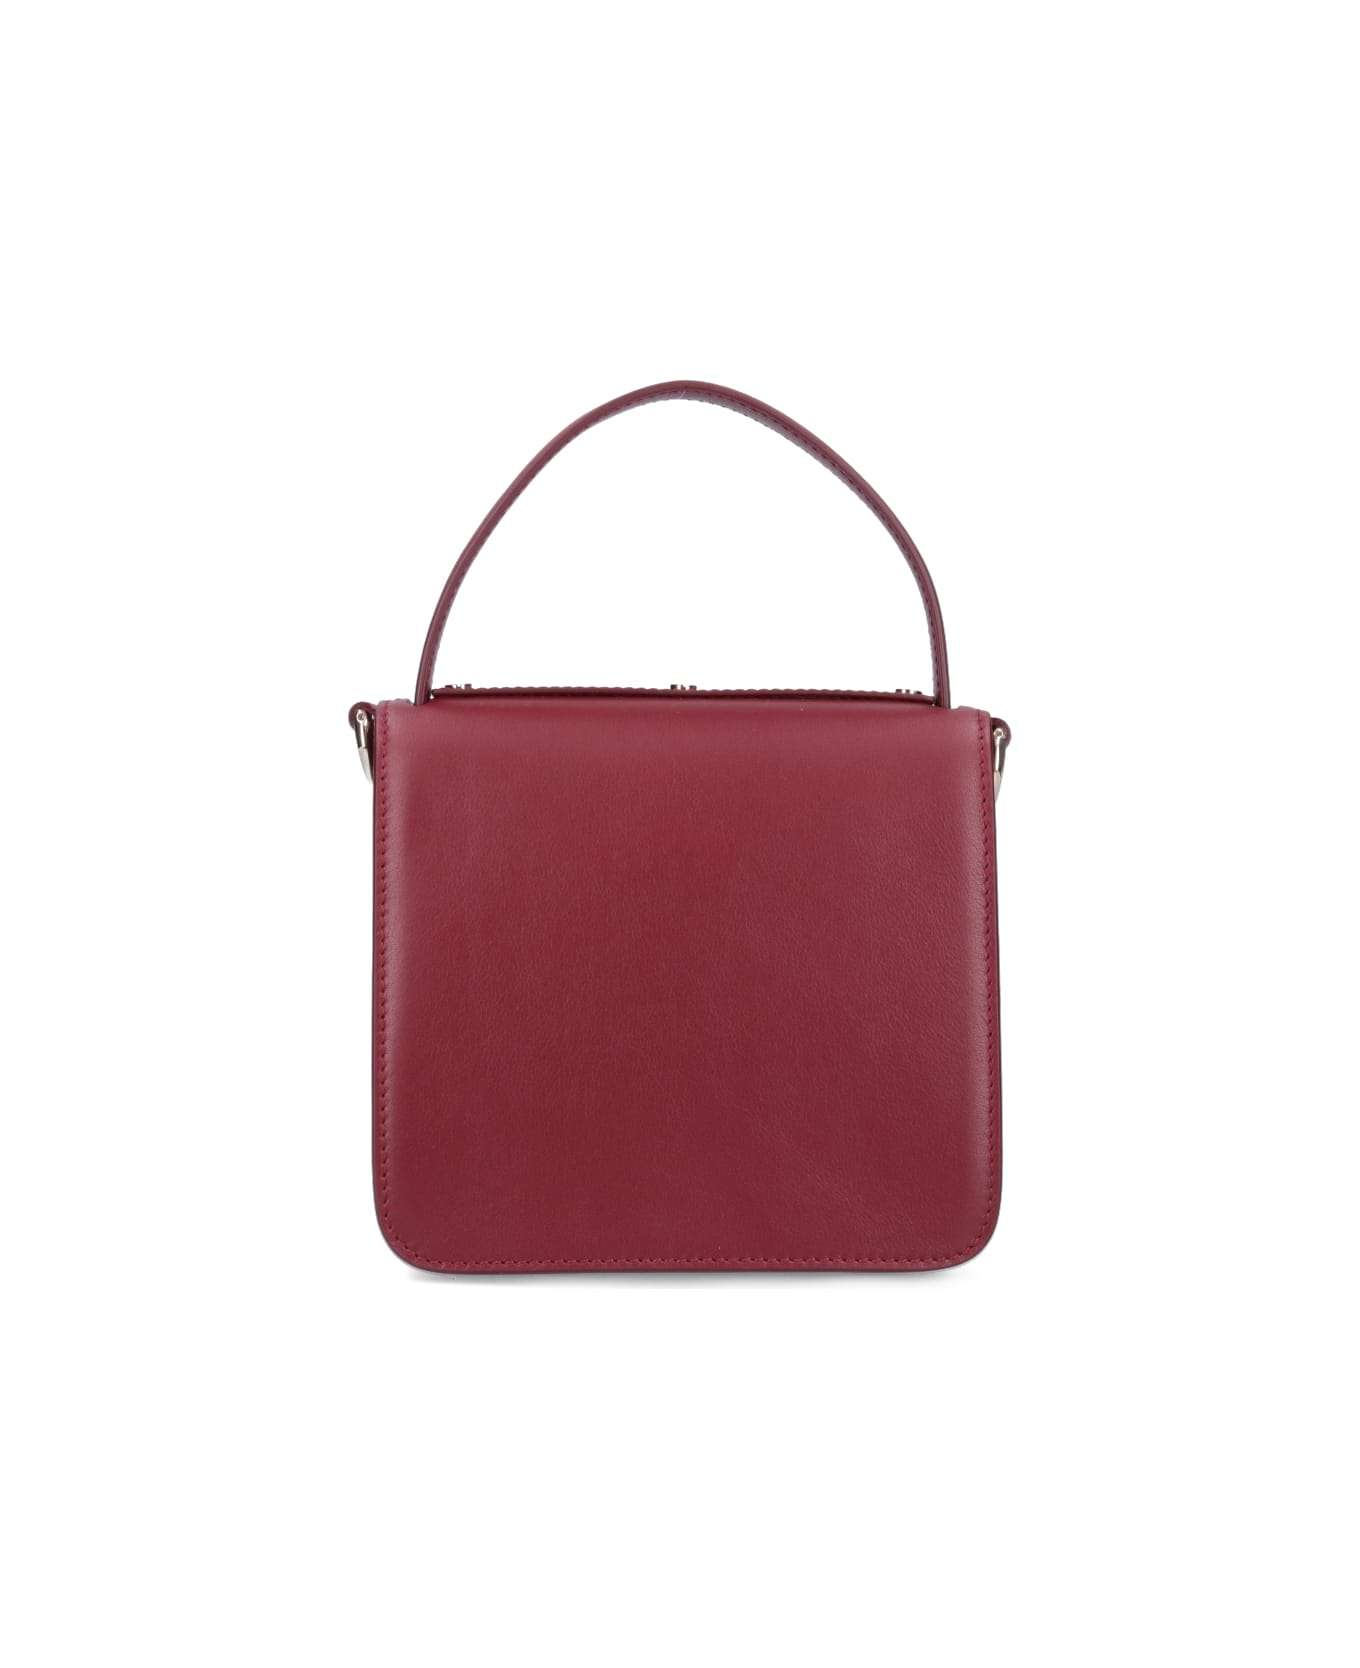 Chloé Small Bag "penelope" - Red